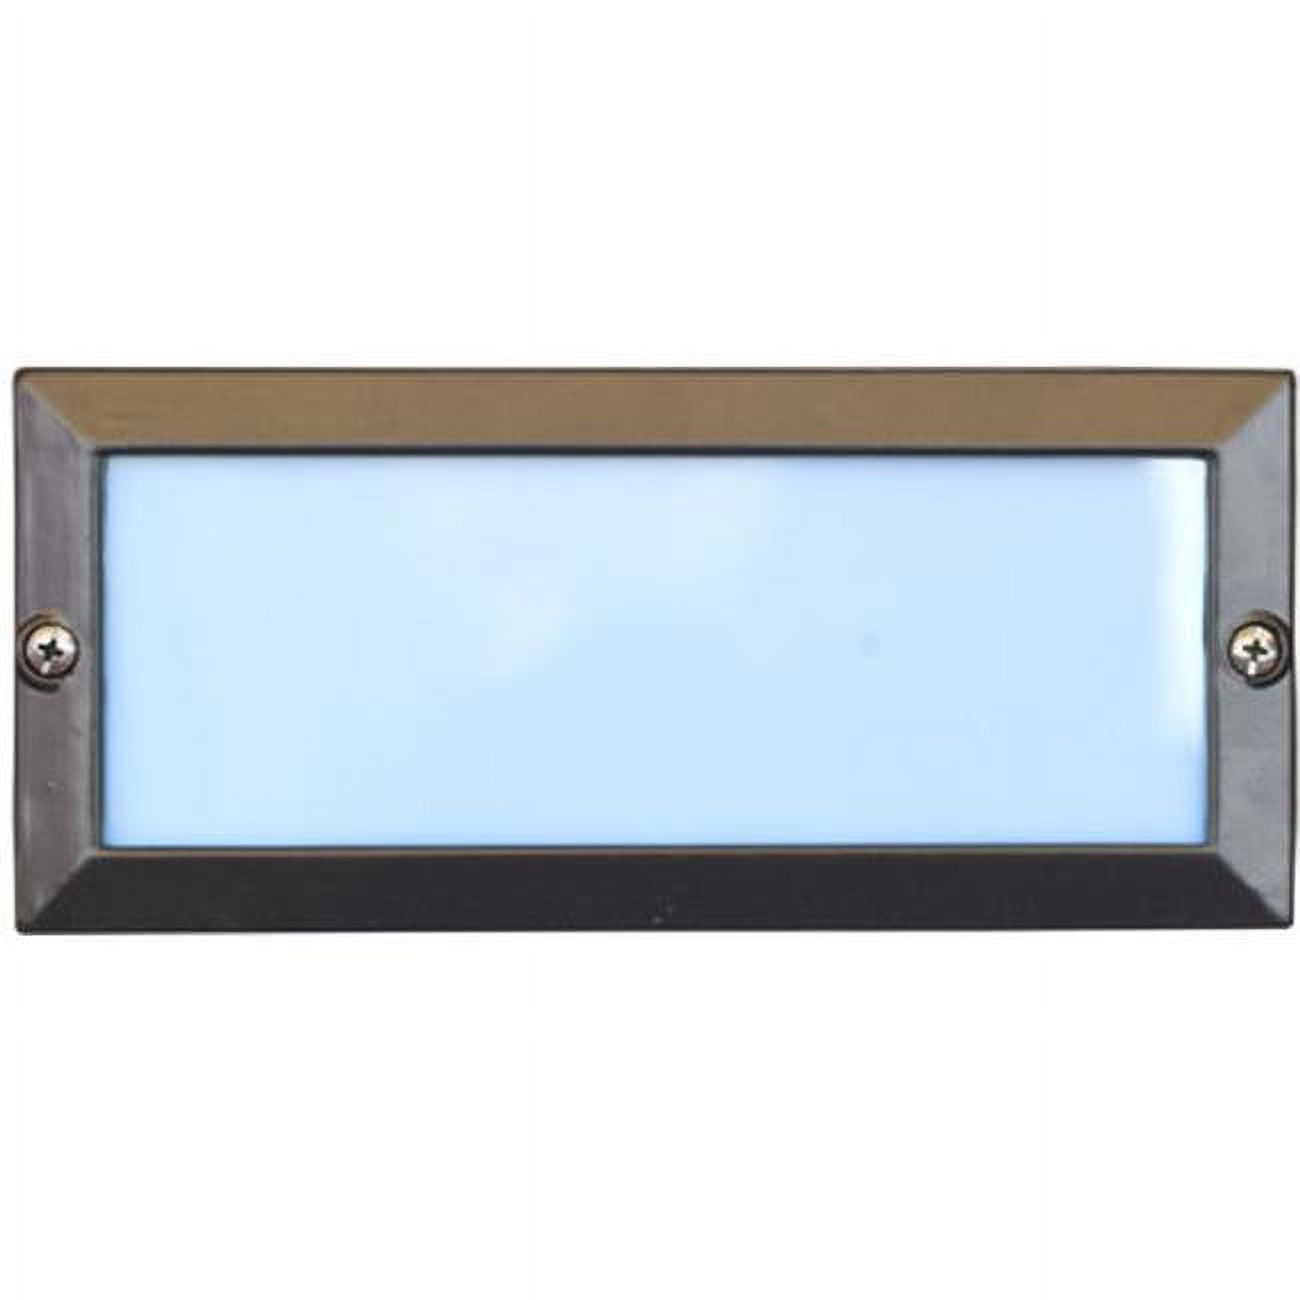 Picture of Dabmar Lighting LV602-BZ Cast Aluminum Recessed Open Face Brick, Step & Wall Light, Bronze - 4 x 9.13 x 3.25 in.